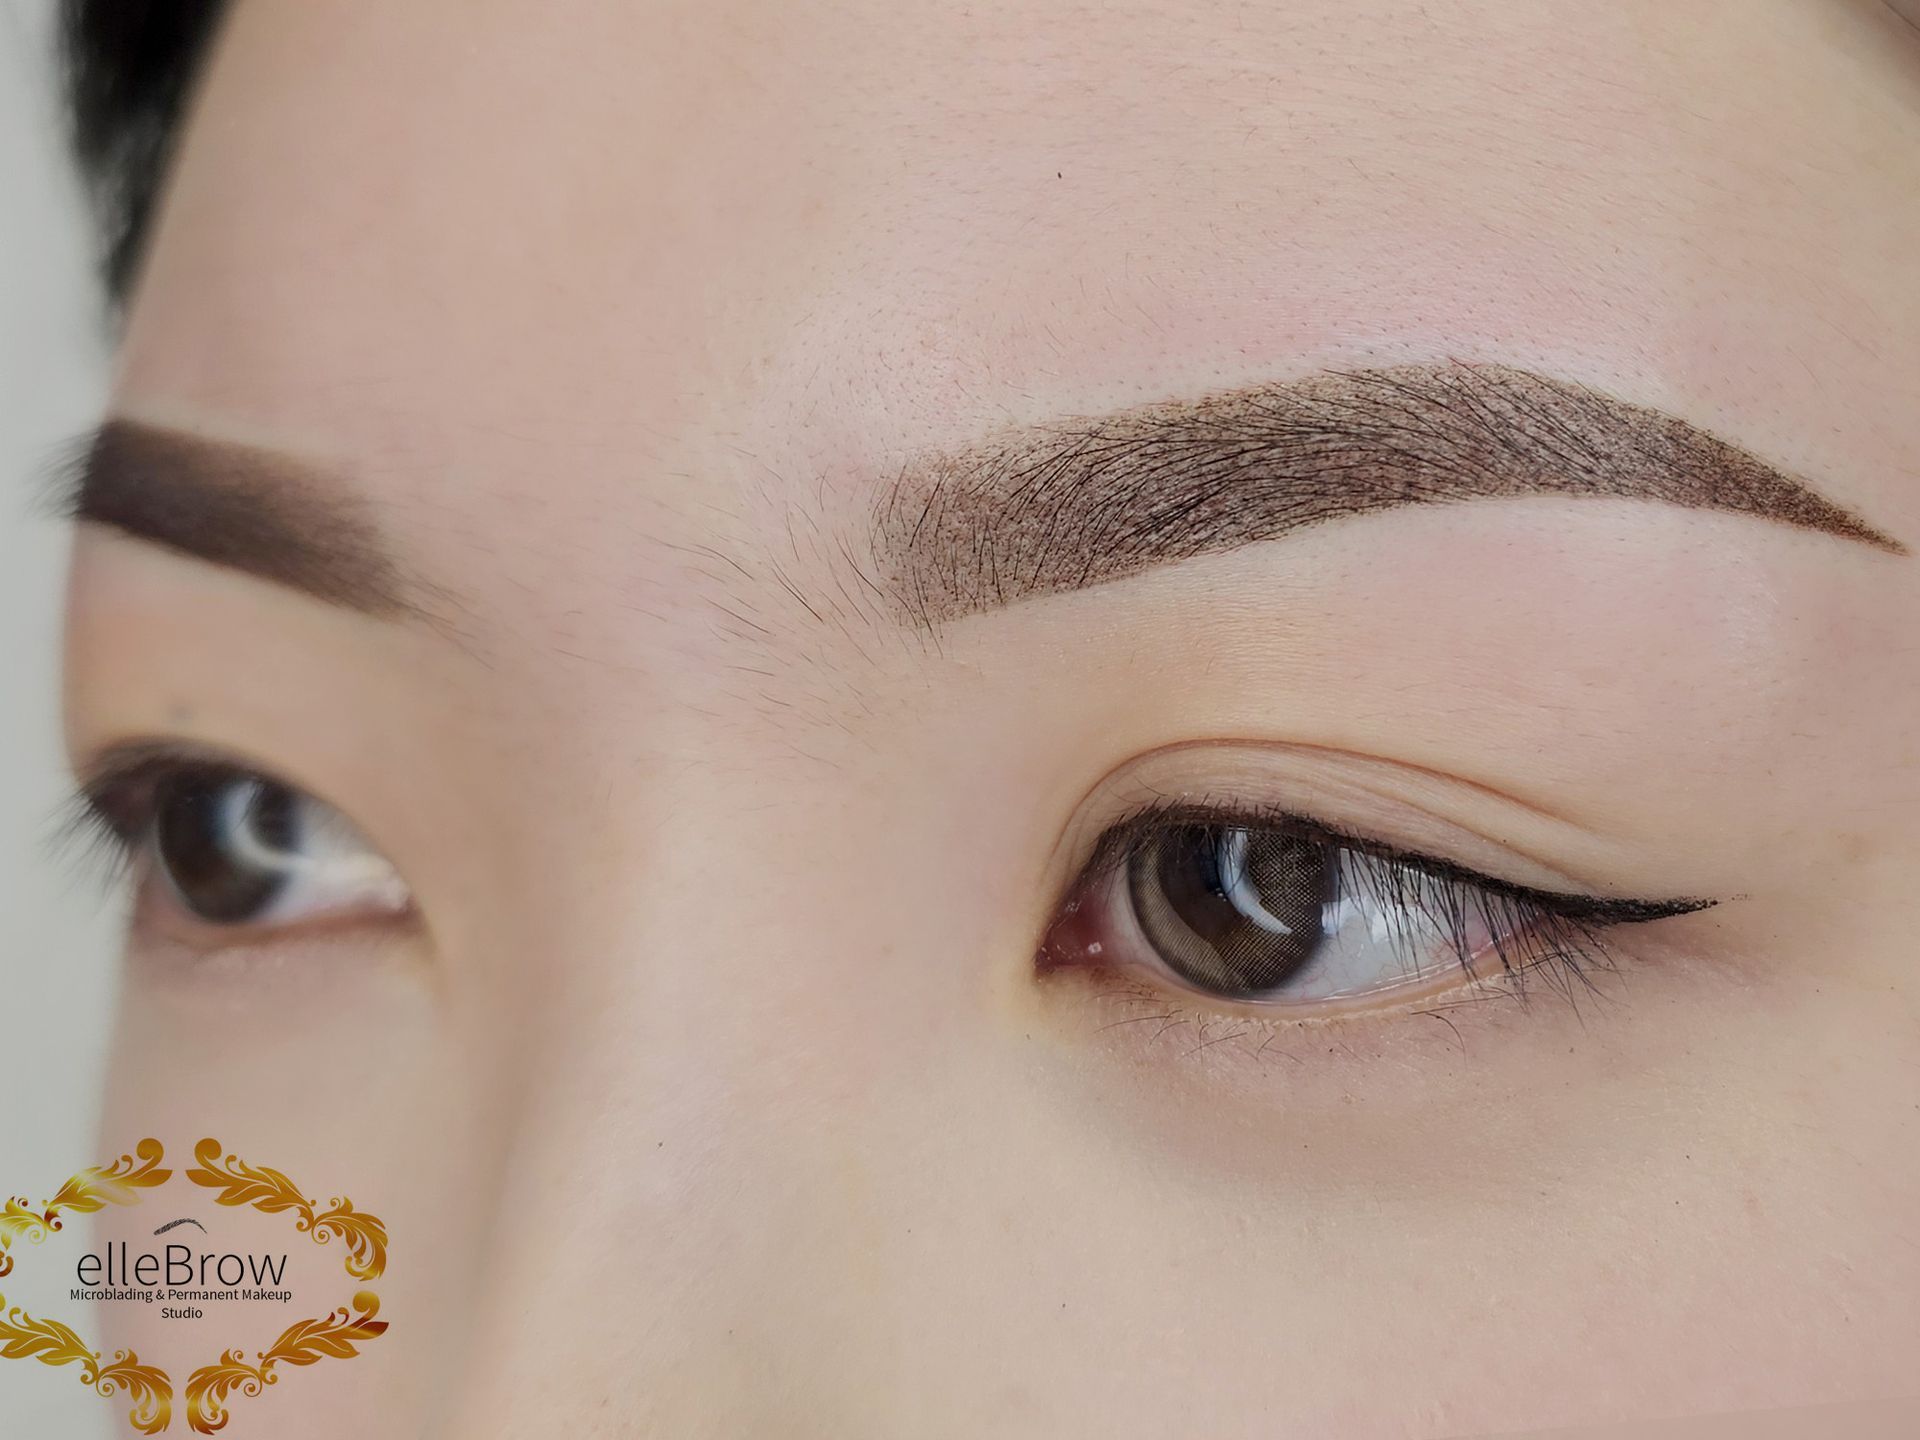 Before and After Eyebrow Powder Brow Styling by Ellebrow Microshading NYC